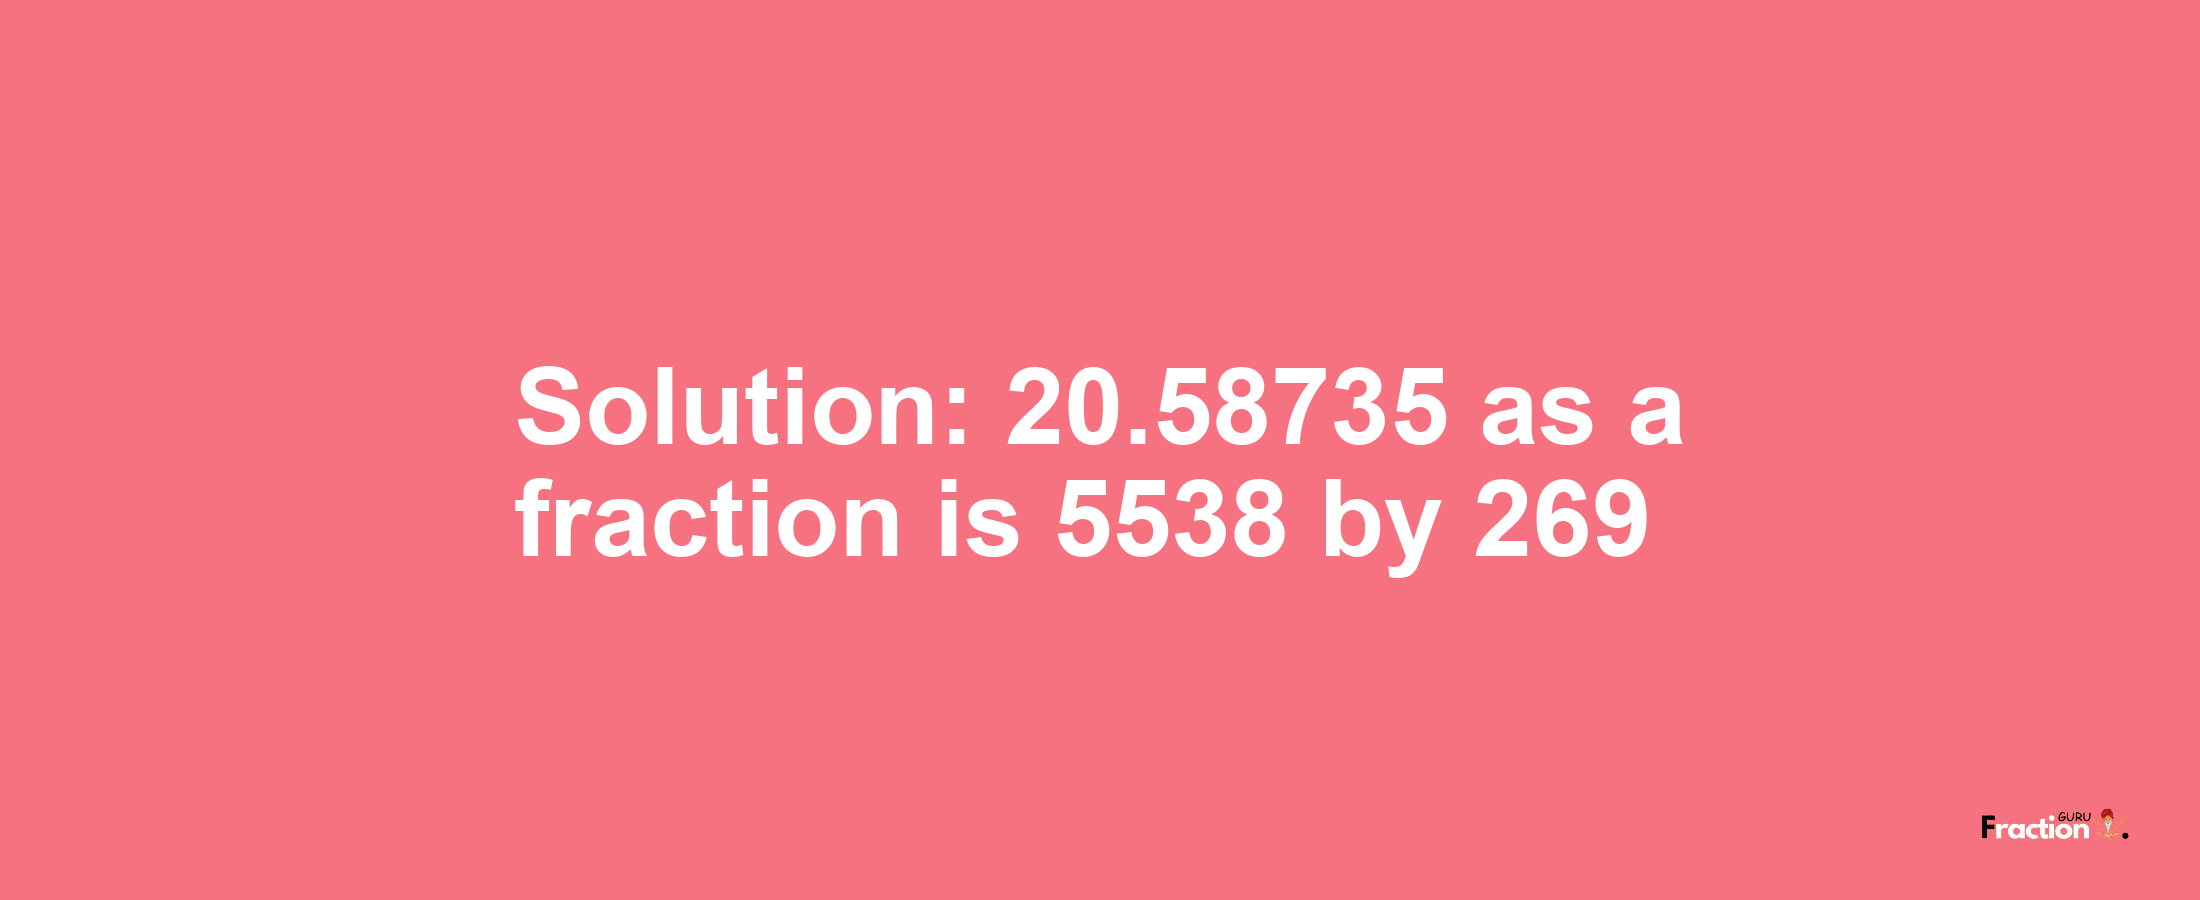 Solution:20.58735 as a fraction is 5538/269